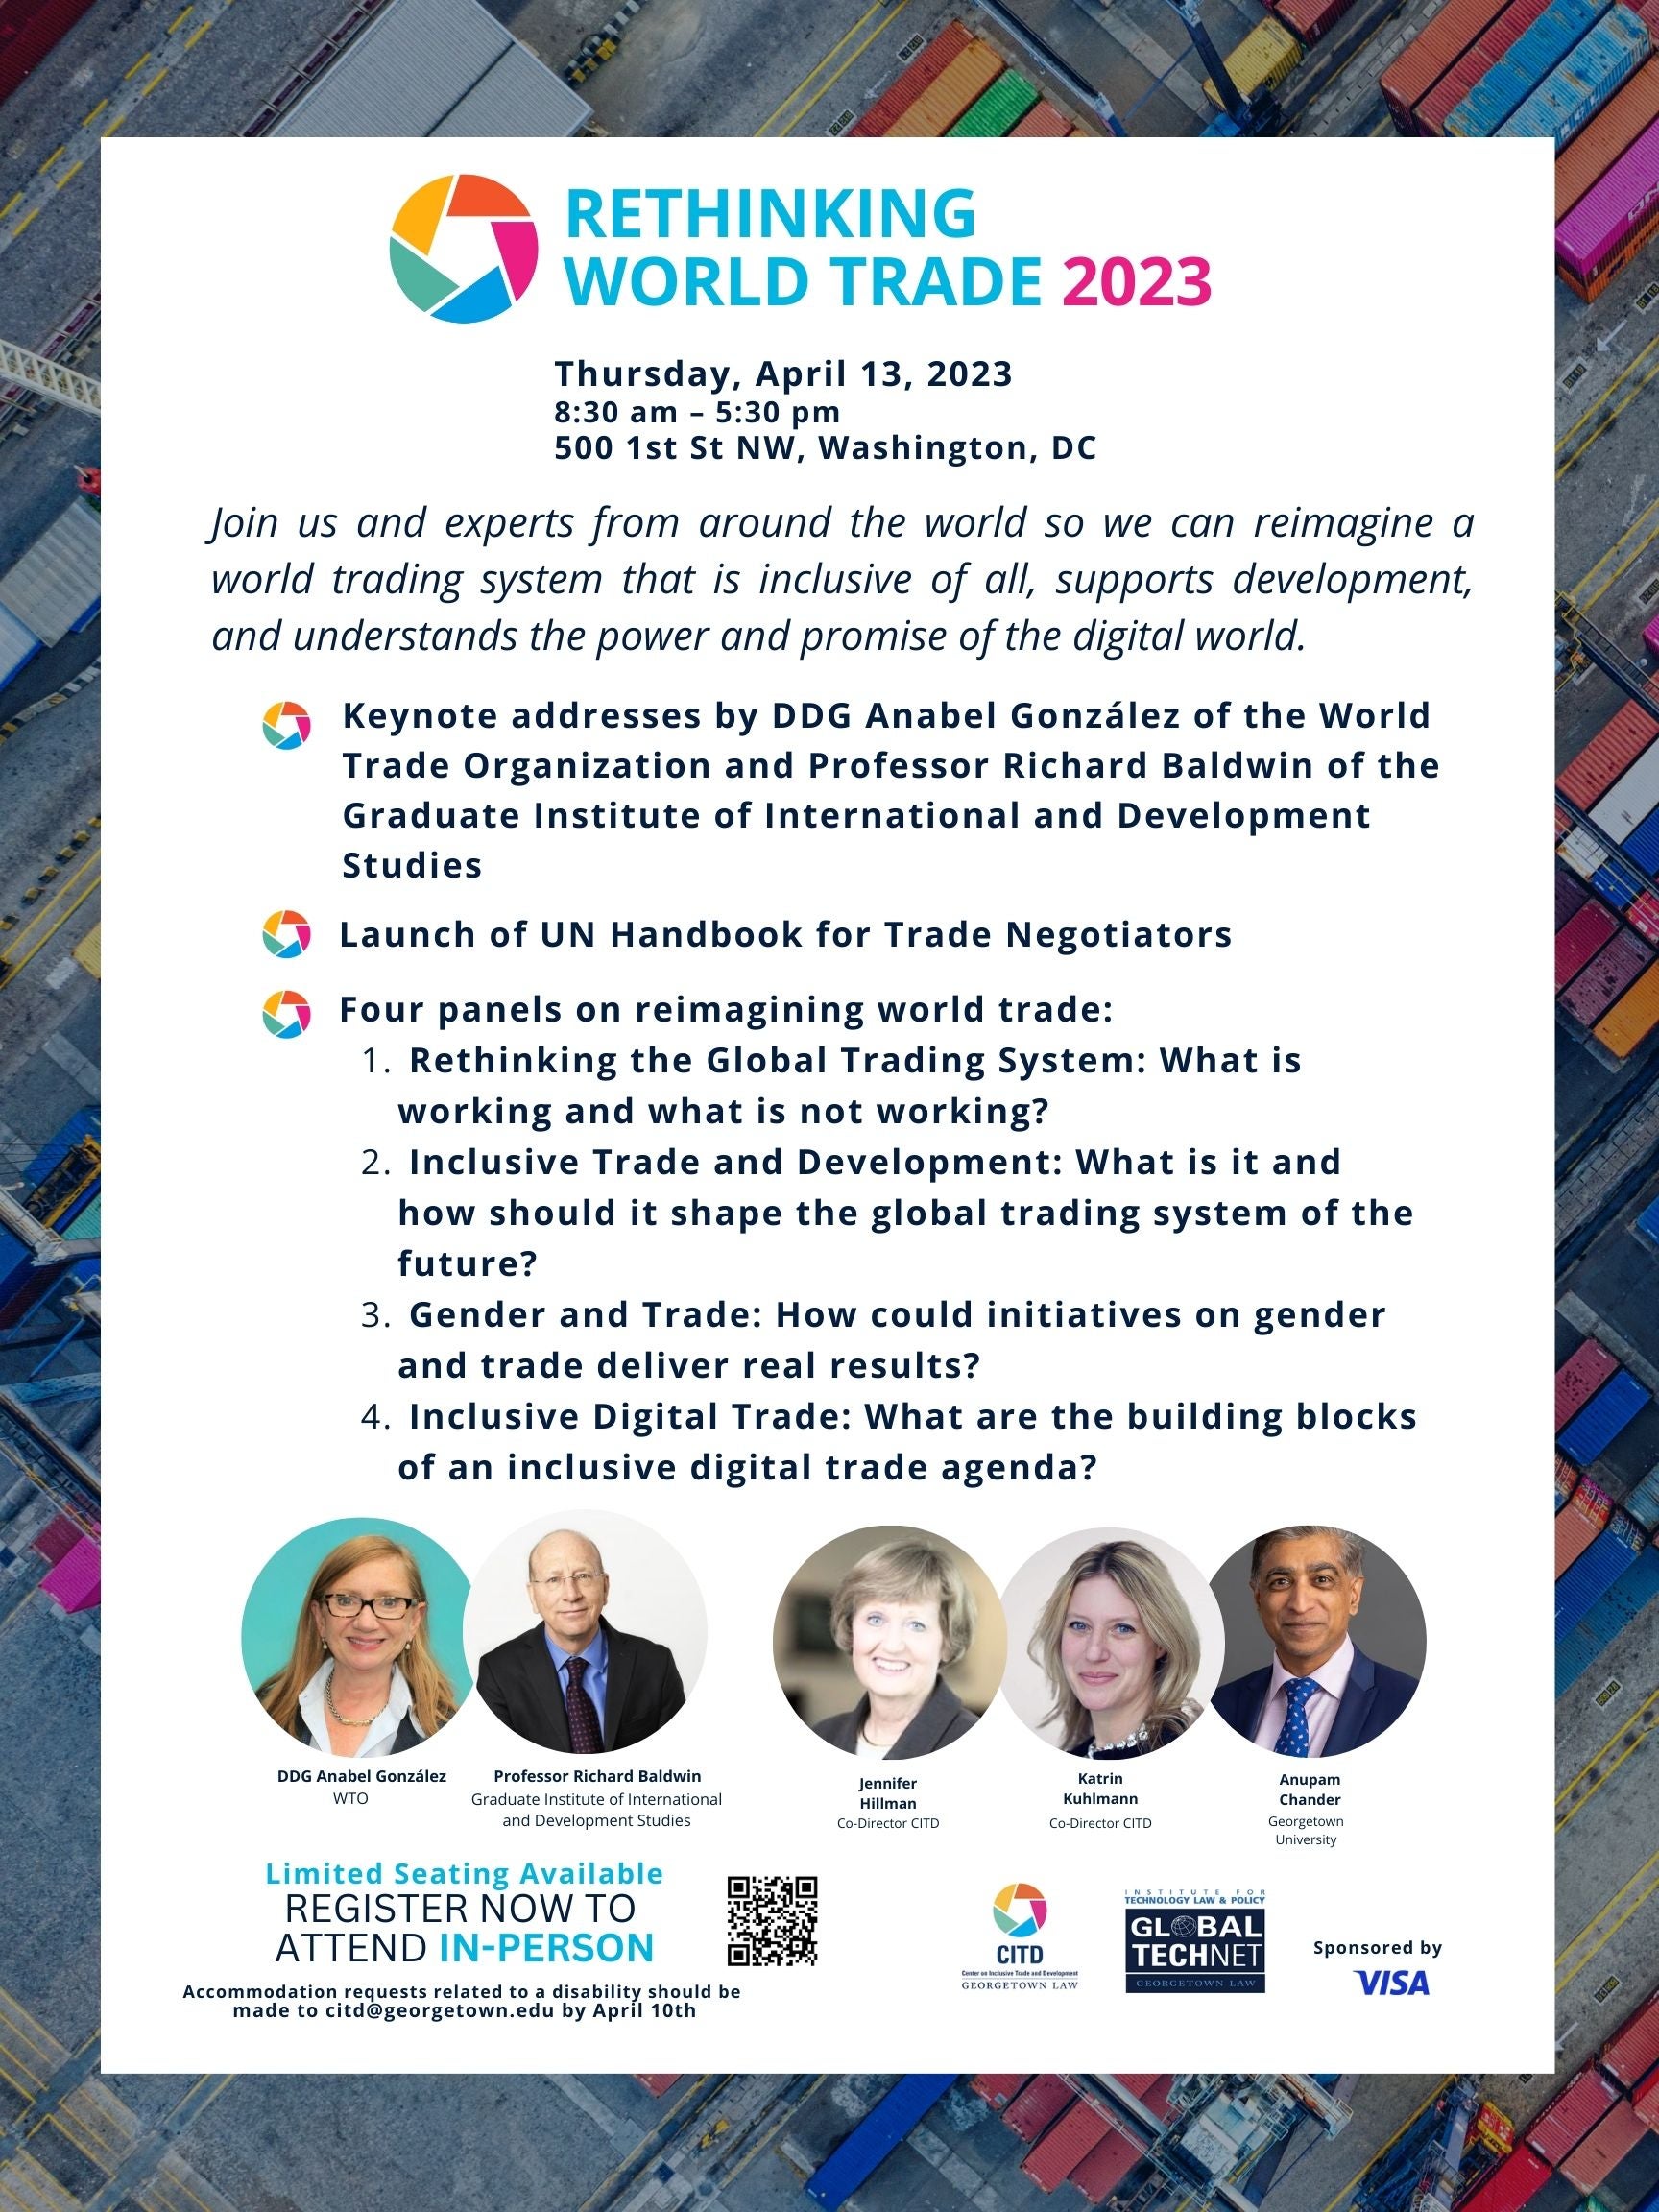 Rethinking World Trade 2023 Flier which states: Date: Thursday, April 13, 2023 Time: 8:30 am - 5:30 pm Address: 500 1st St NW, Washington, DC Join us and experts from around the world so we can reimagine a world trading system that is inclusive of all, supports development, and understands the power and promise of the digital world. 1. Keynote addresses by DDG Anabel González of the World Trade Organization and Professor Richard Baldwin of the Graduate Institute of International and Development Studies. 2. Launch of UN Handbook for Trade Negotiators. 3. Four panels on reimagining world trade: Rethinking the Global Trading System: What is working and what is not working? Inclusive Trade and Development: What is it and how should it shape the global trading system of the future? Gender and Trade: How could initiatives on gender and trade deliver real results? Inclusive Digital Trade: What are the building blocks of an inclusive digital trade agenda? Limited Seating Available REGISTER NOW TO ATTEND IN-PERSON Accommodation requests related to a disability should be made to citd@georgetown.edu by April 10th. Photos of panelists in order: DDG Anabel Gonzalez WTO, Professor Richard Baldwin Graduate Institute of International Development Studies, Jennifer Hillman Co-Director CITD, Katrin Kuhlmann Co-Director CITD, Anupam Chander Georgetown University. Organized by Center on International Trade and Development and the Global Tech Net Working Group, sponsored by VISA.